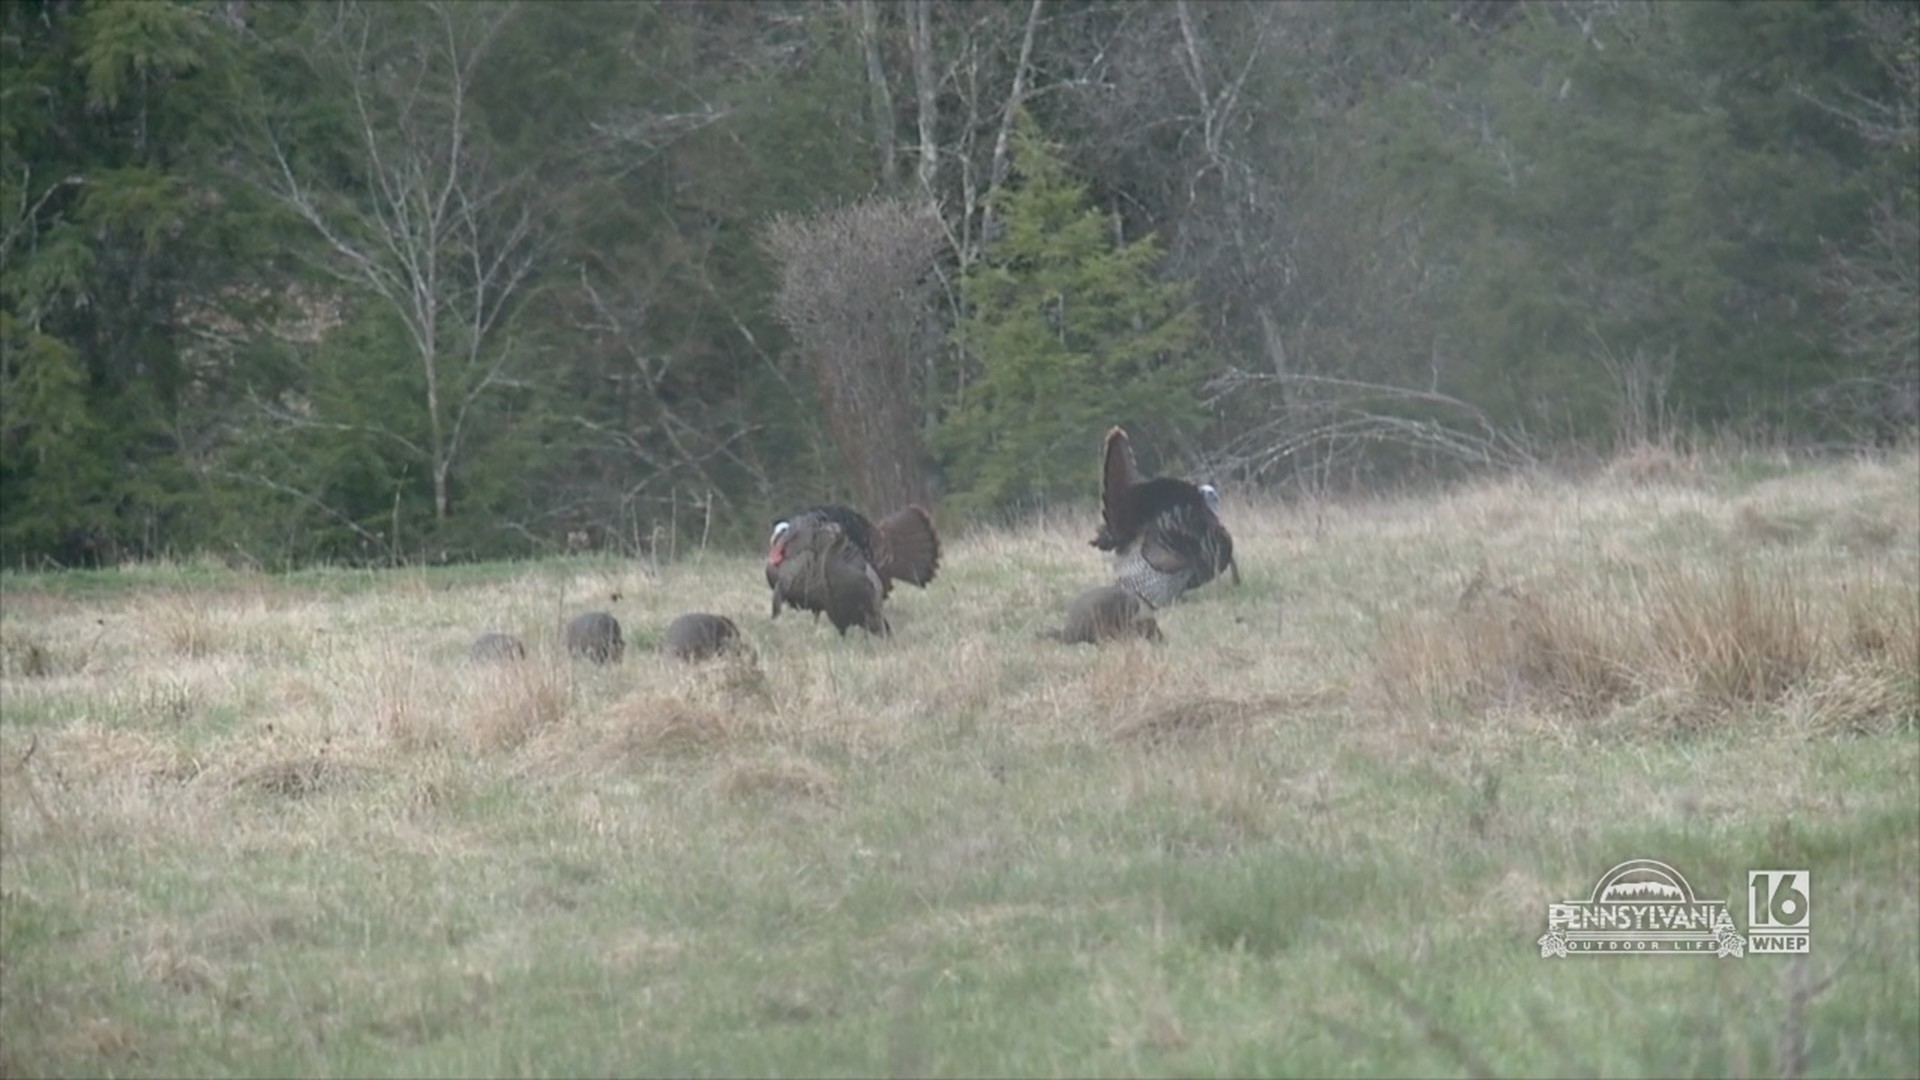 Need help when it comes to turkey hunting?  Look no further than Dunkelberger's.